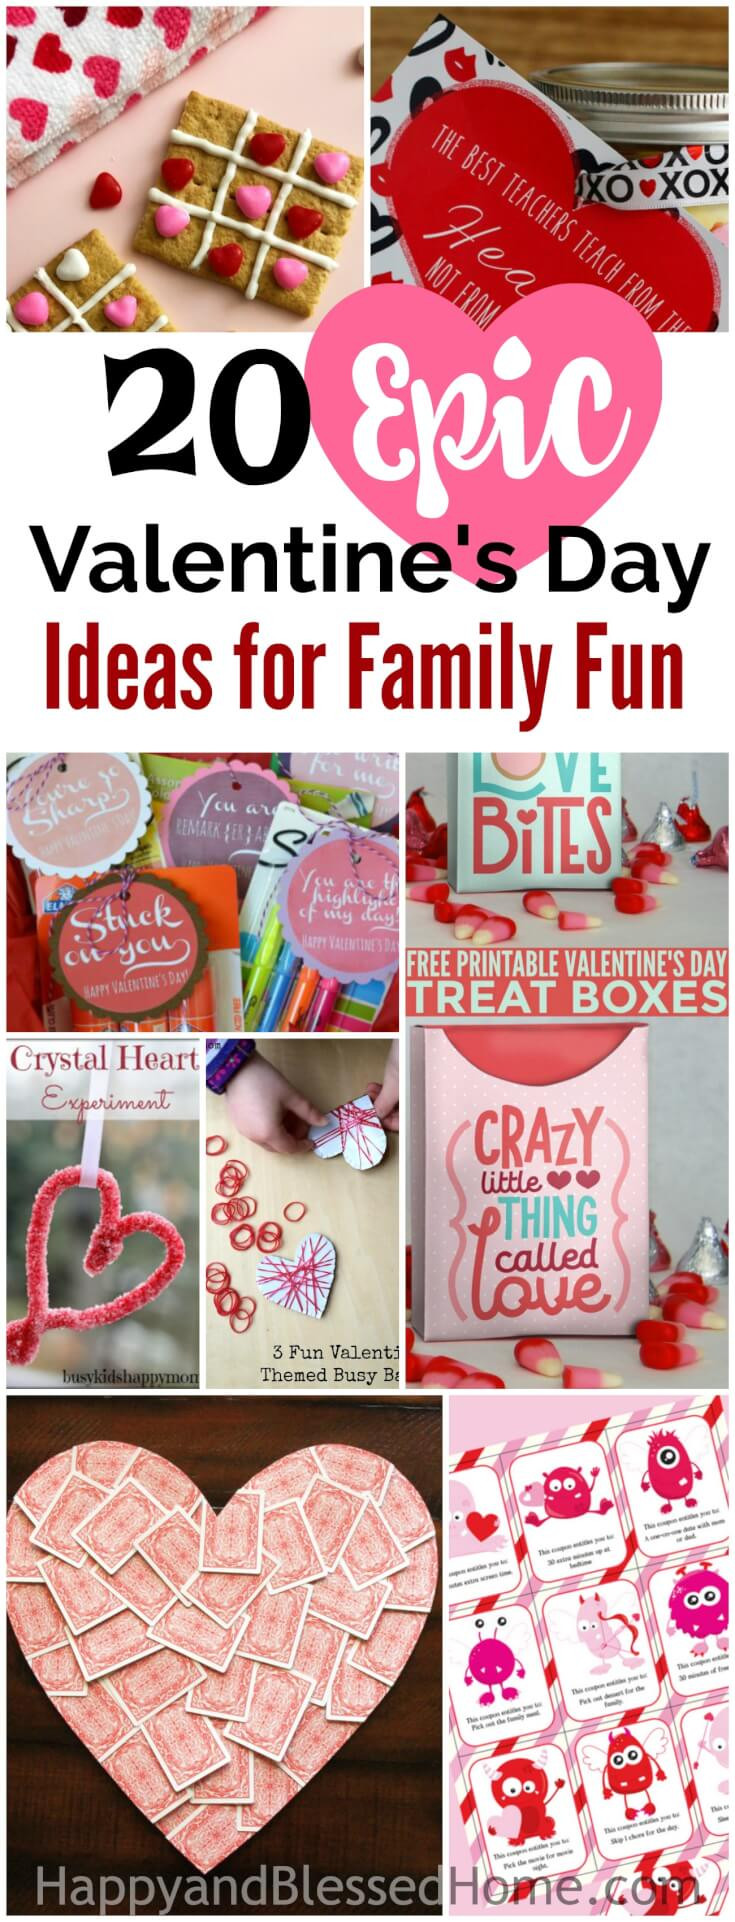 Valentines Day Ideas For Families
 20 Epic Valentine s Day Ideas for Family Fun Happy and